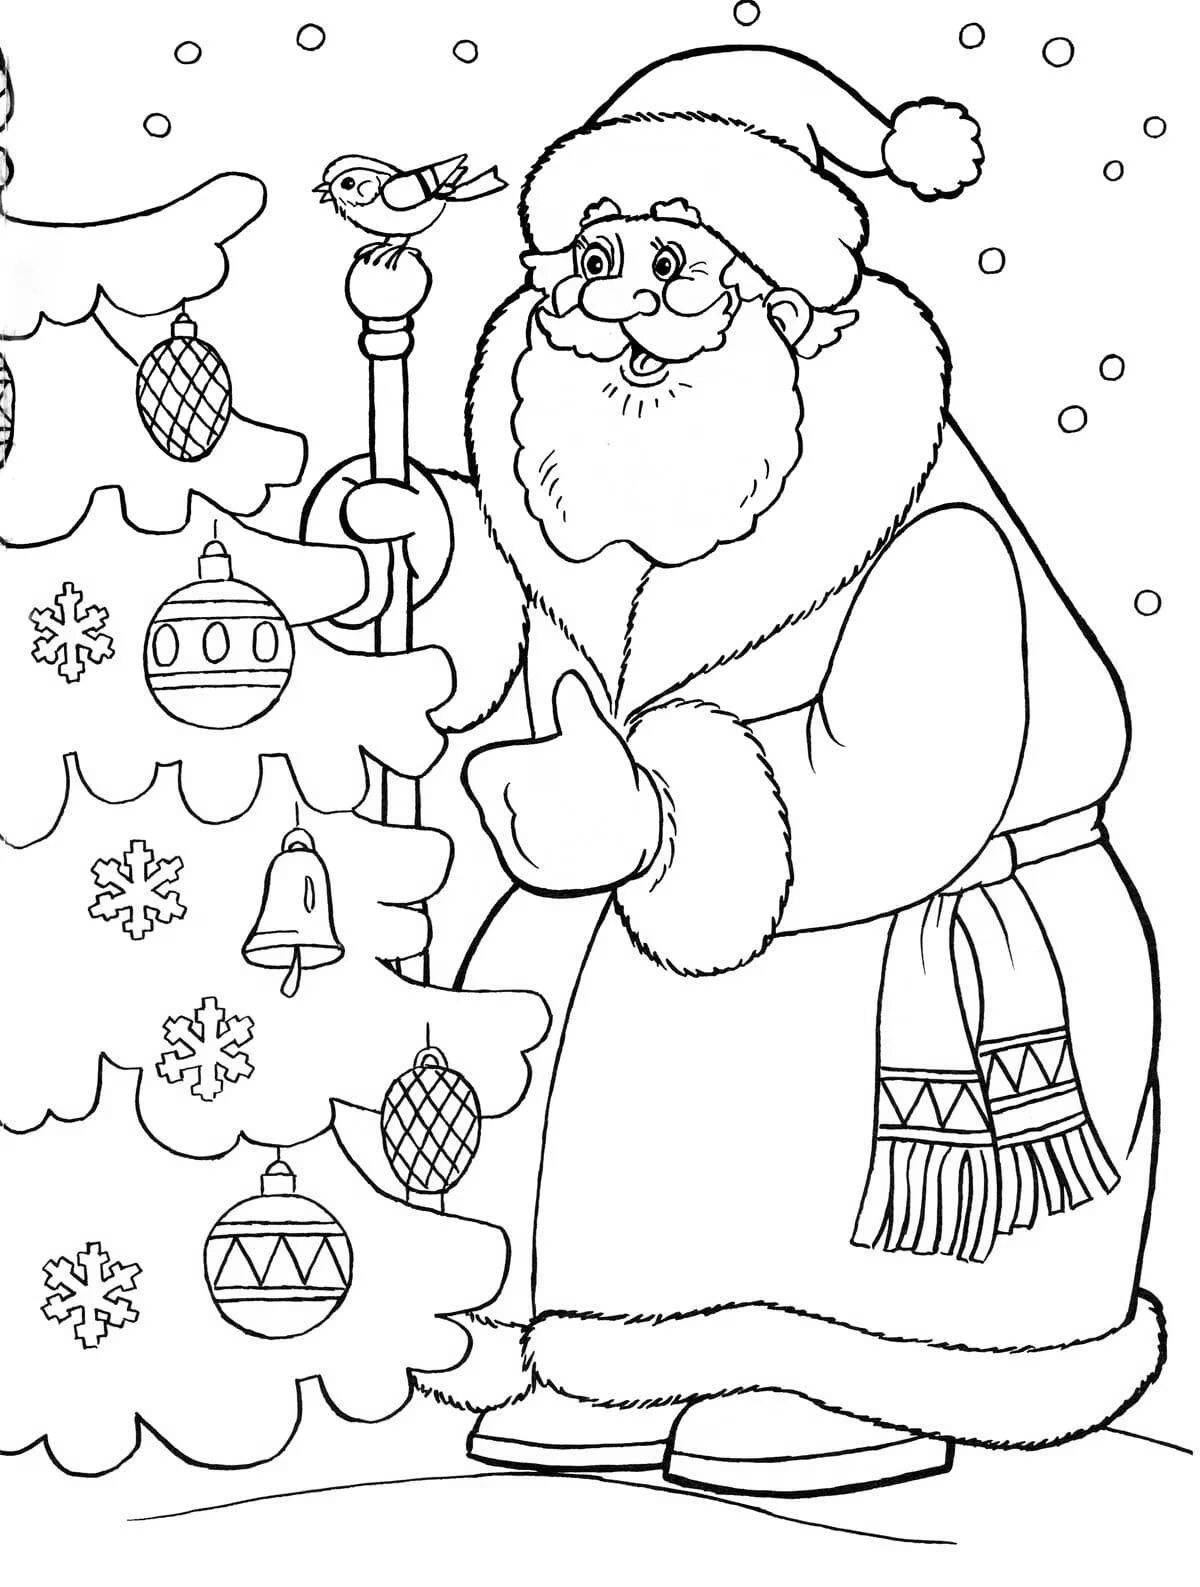 Colorfully decorated Christmas coloring book for kids